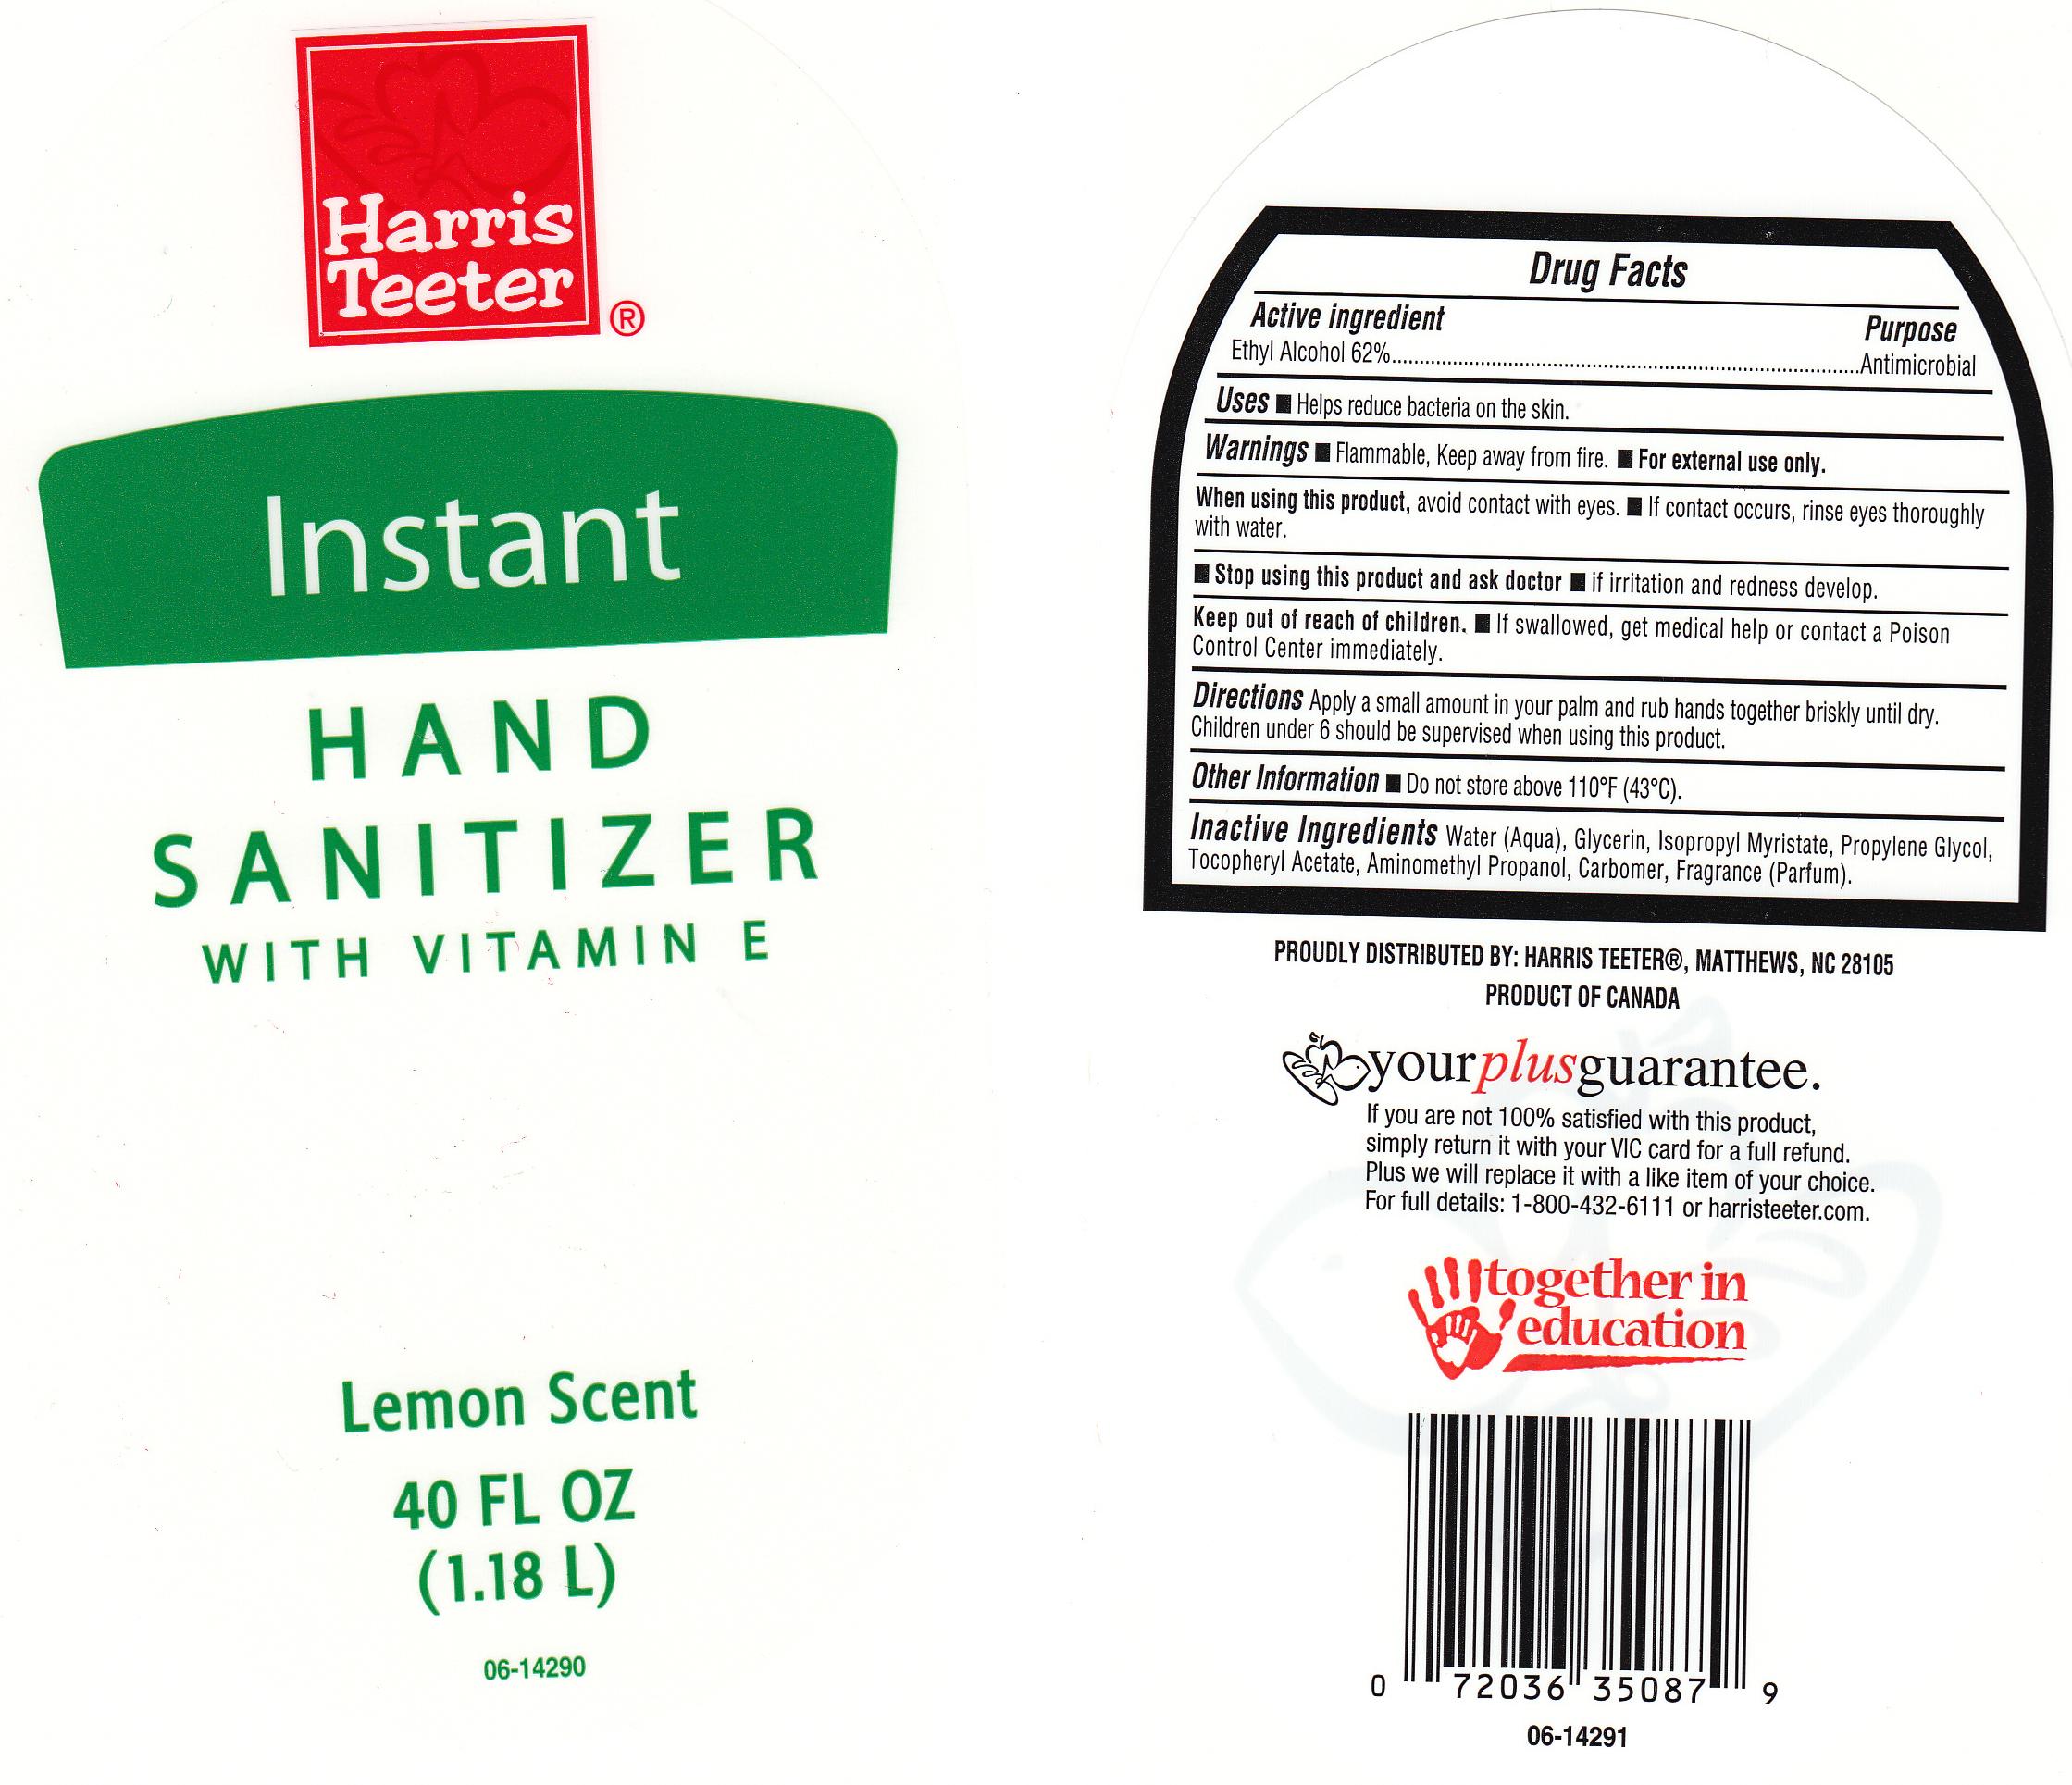 IMAGE OF HAND SANITIZER  WITH VITAMIN E